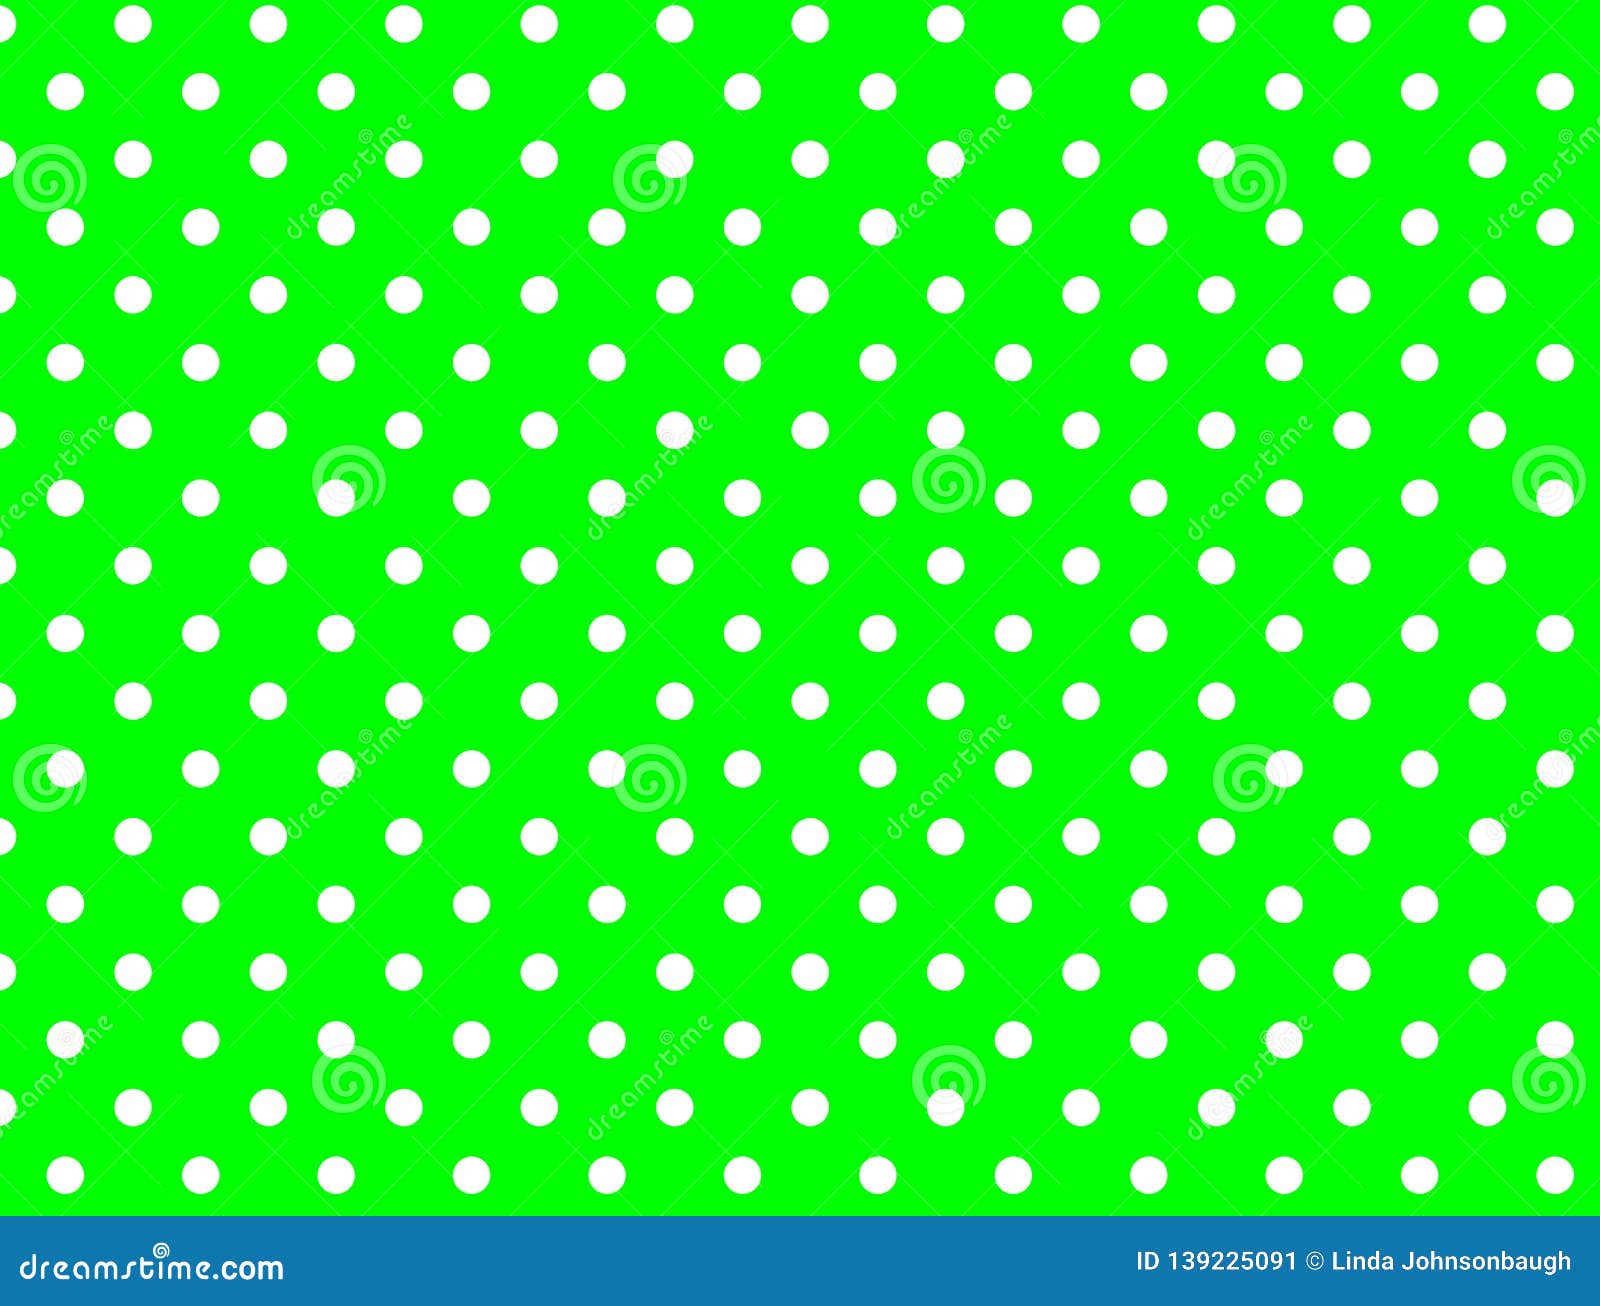 Jpg. Green Background with White Polka Dots Stock Vector ...